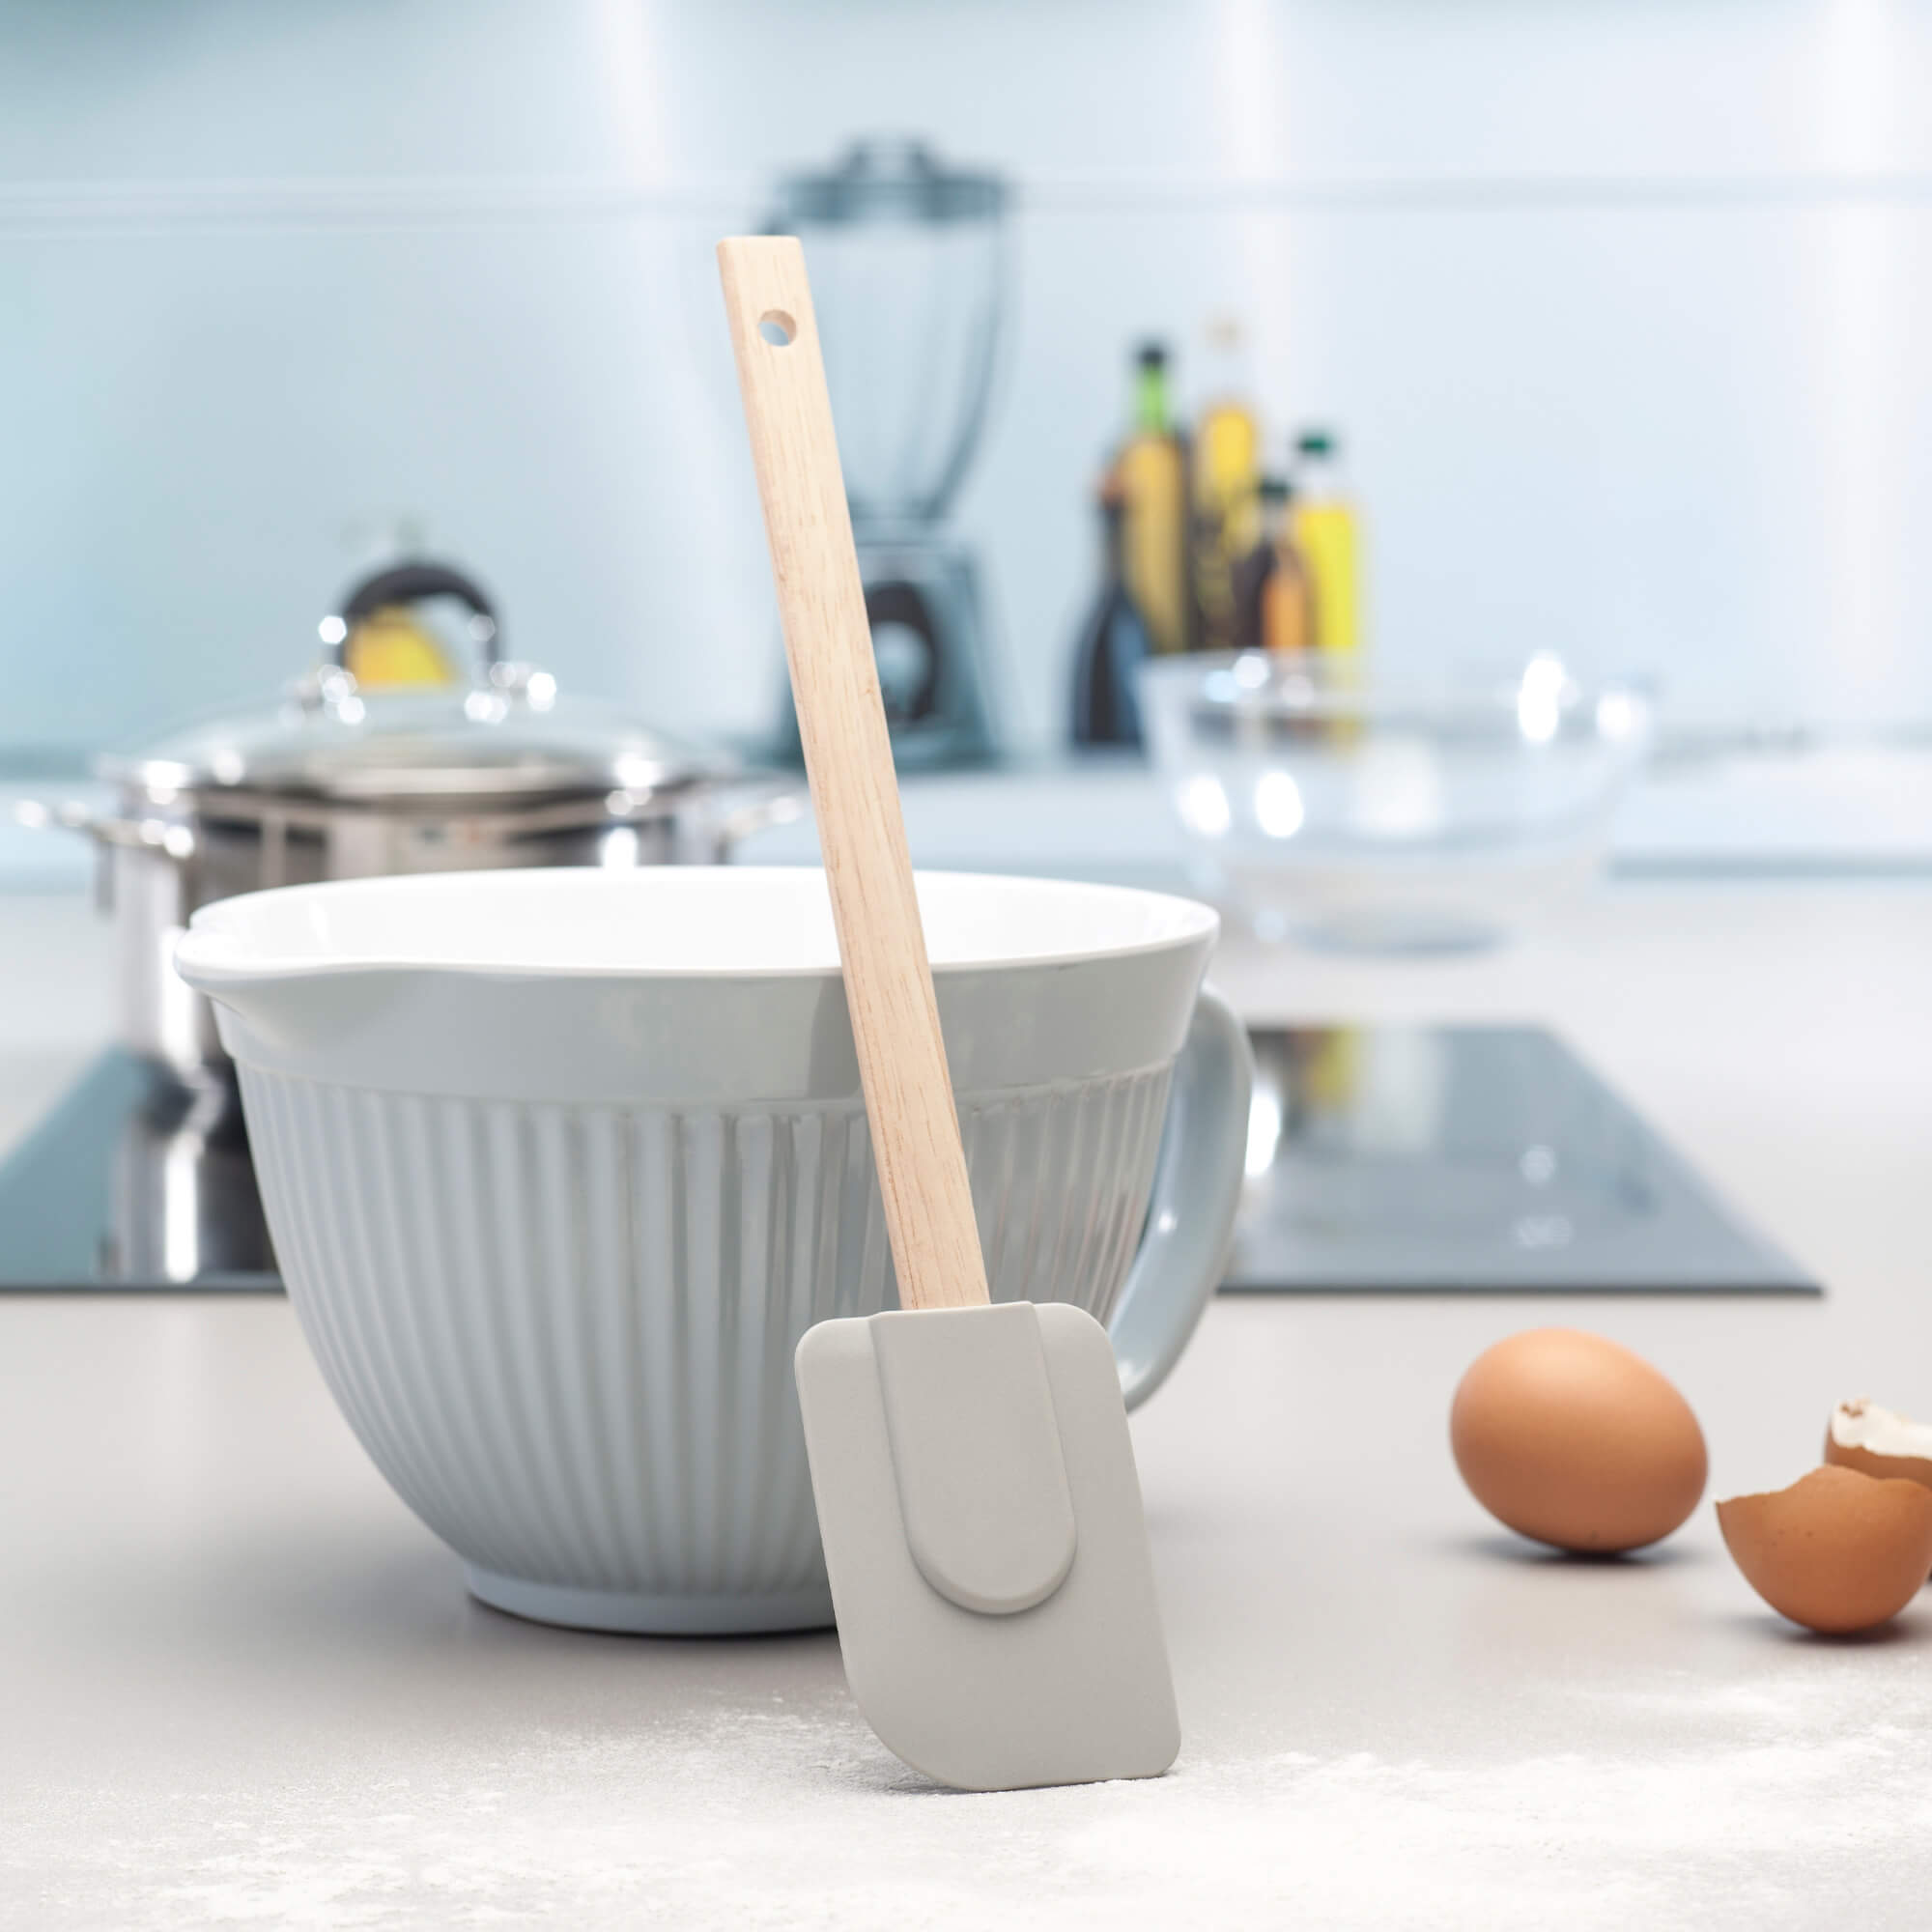 Using a Zeal Silicone Spatula for baking